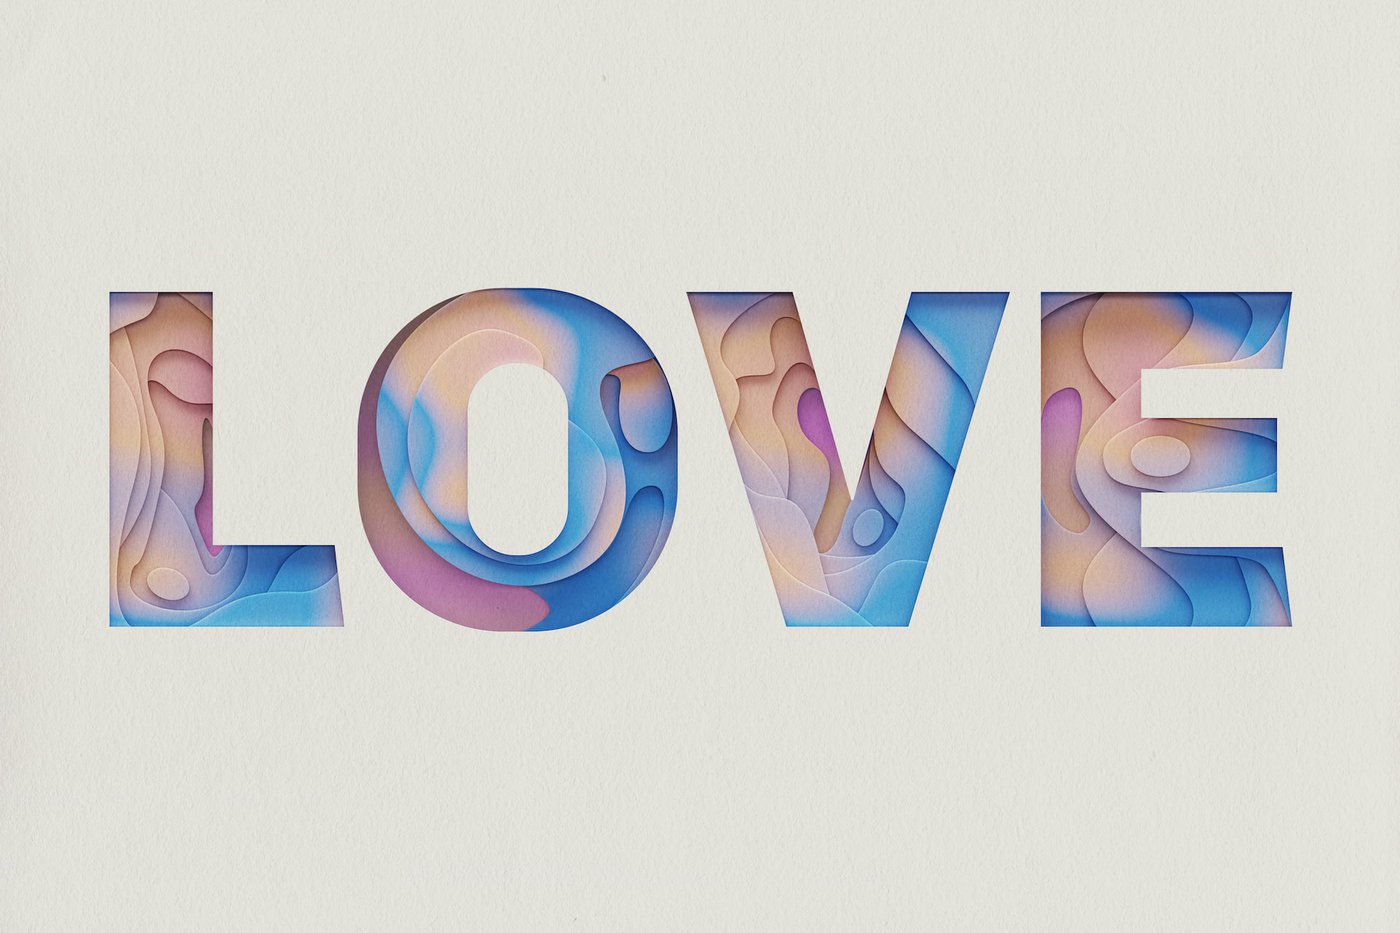 An image of the word Love in bold text with various colors filling each letter. It appears on a white background.